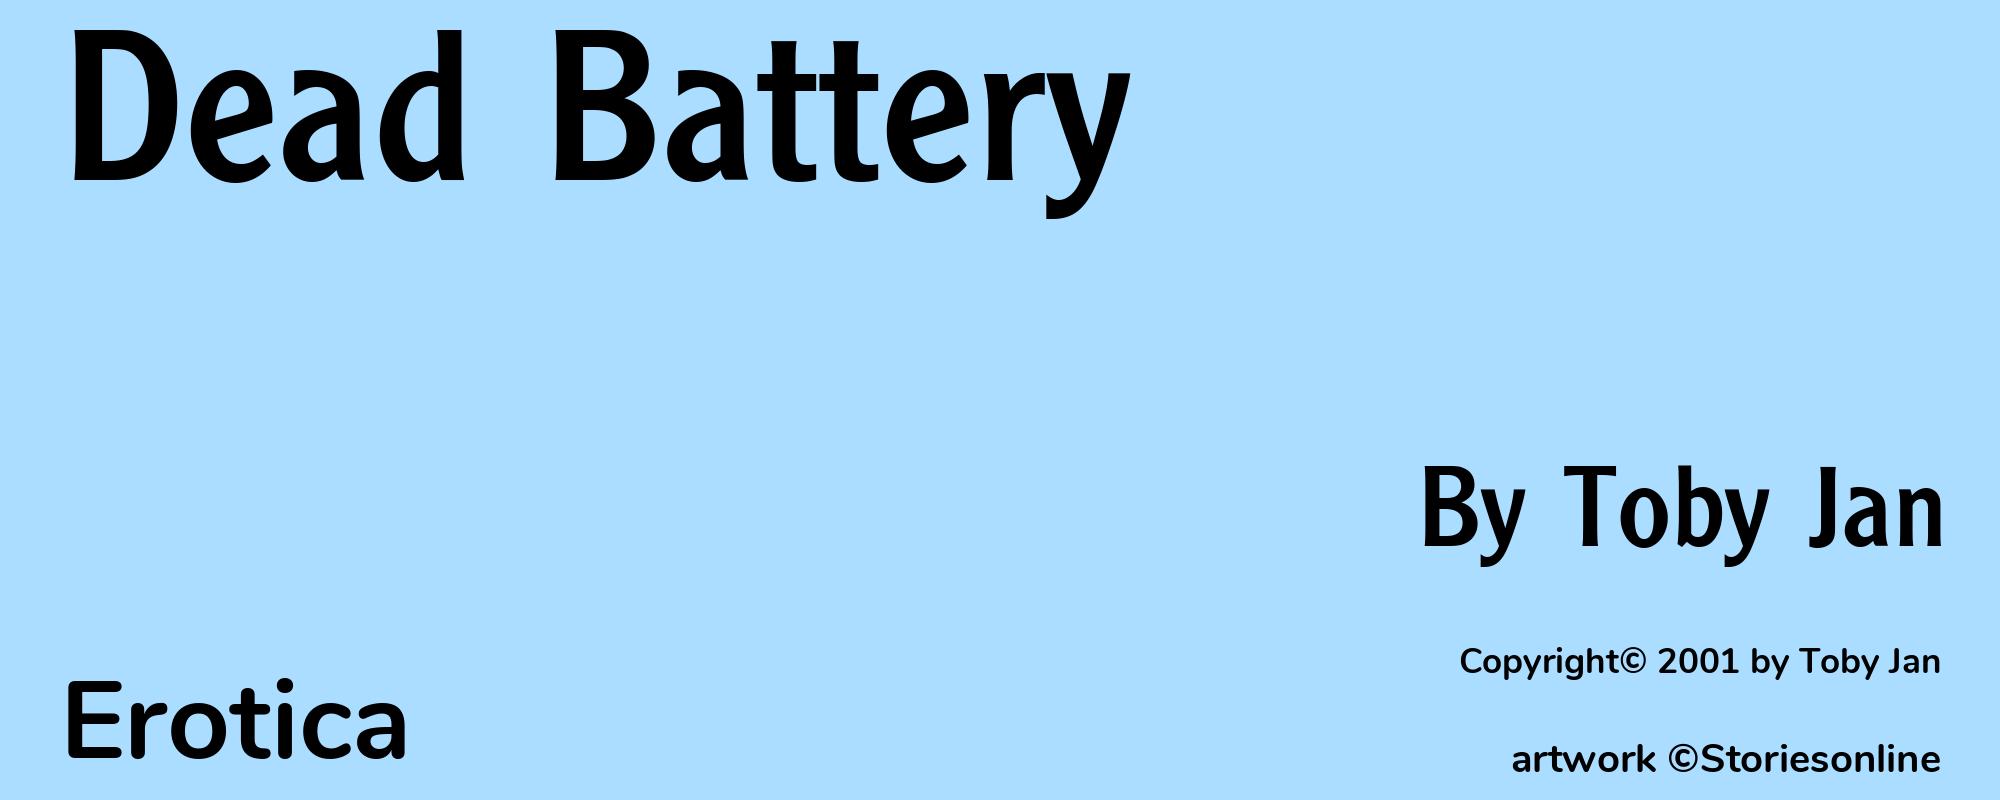 Dead Battery - Cover